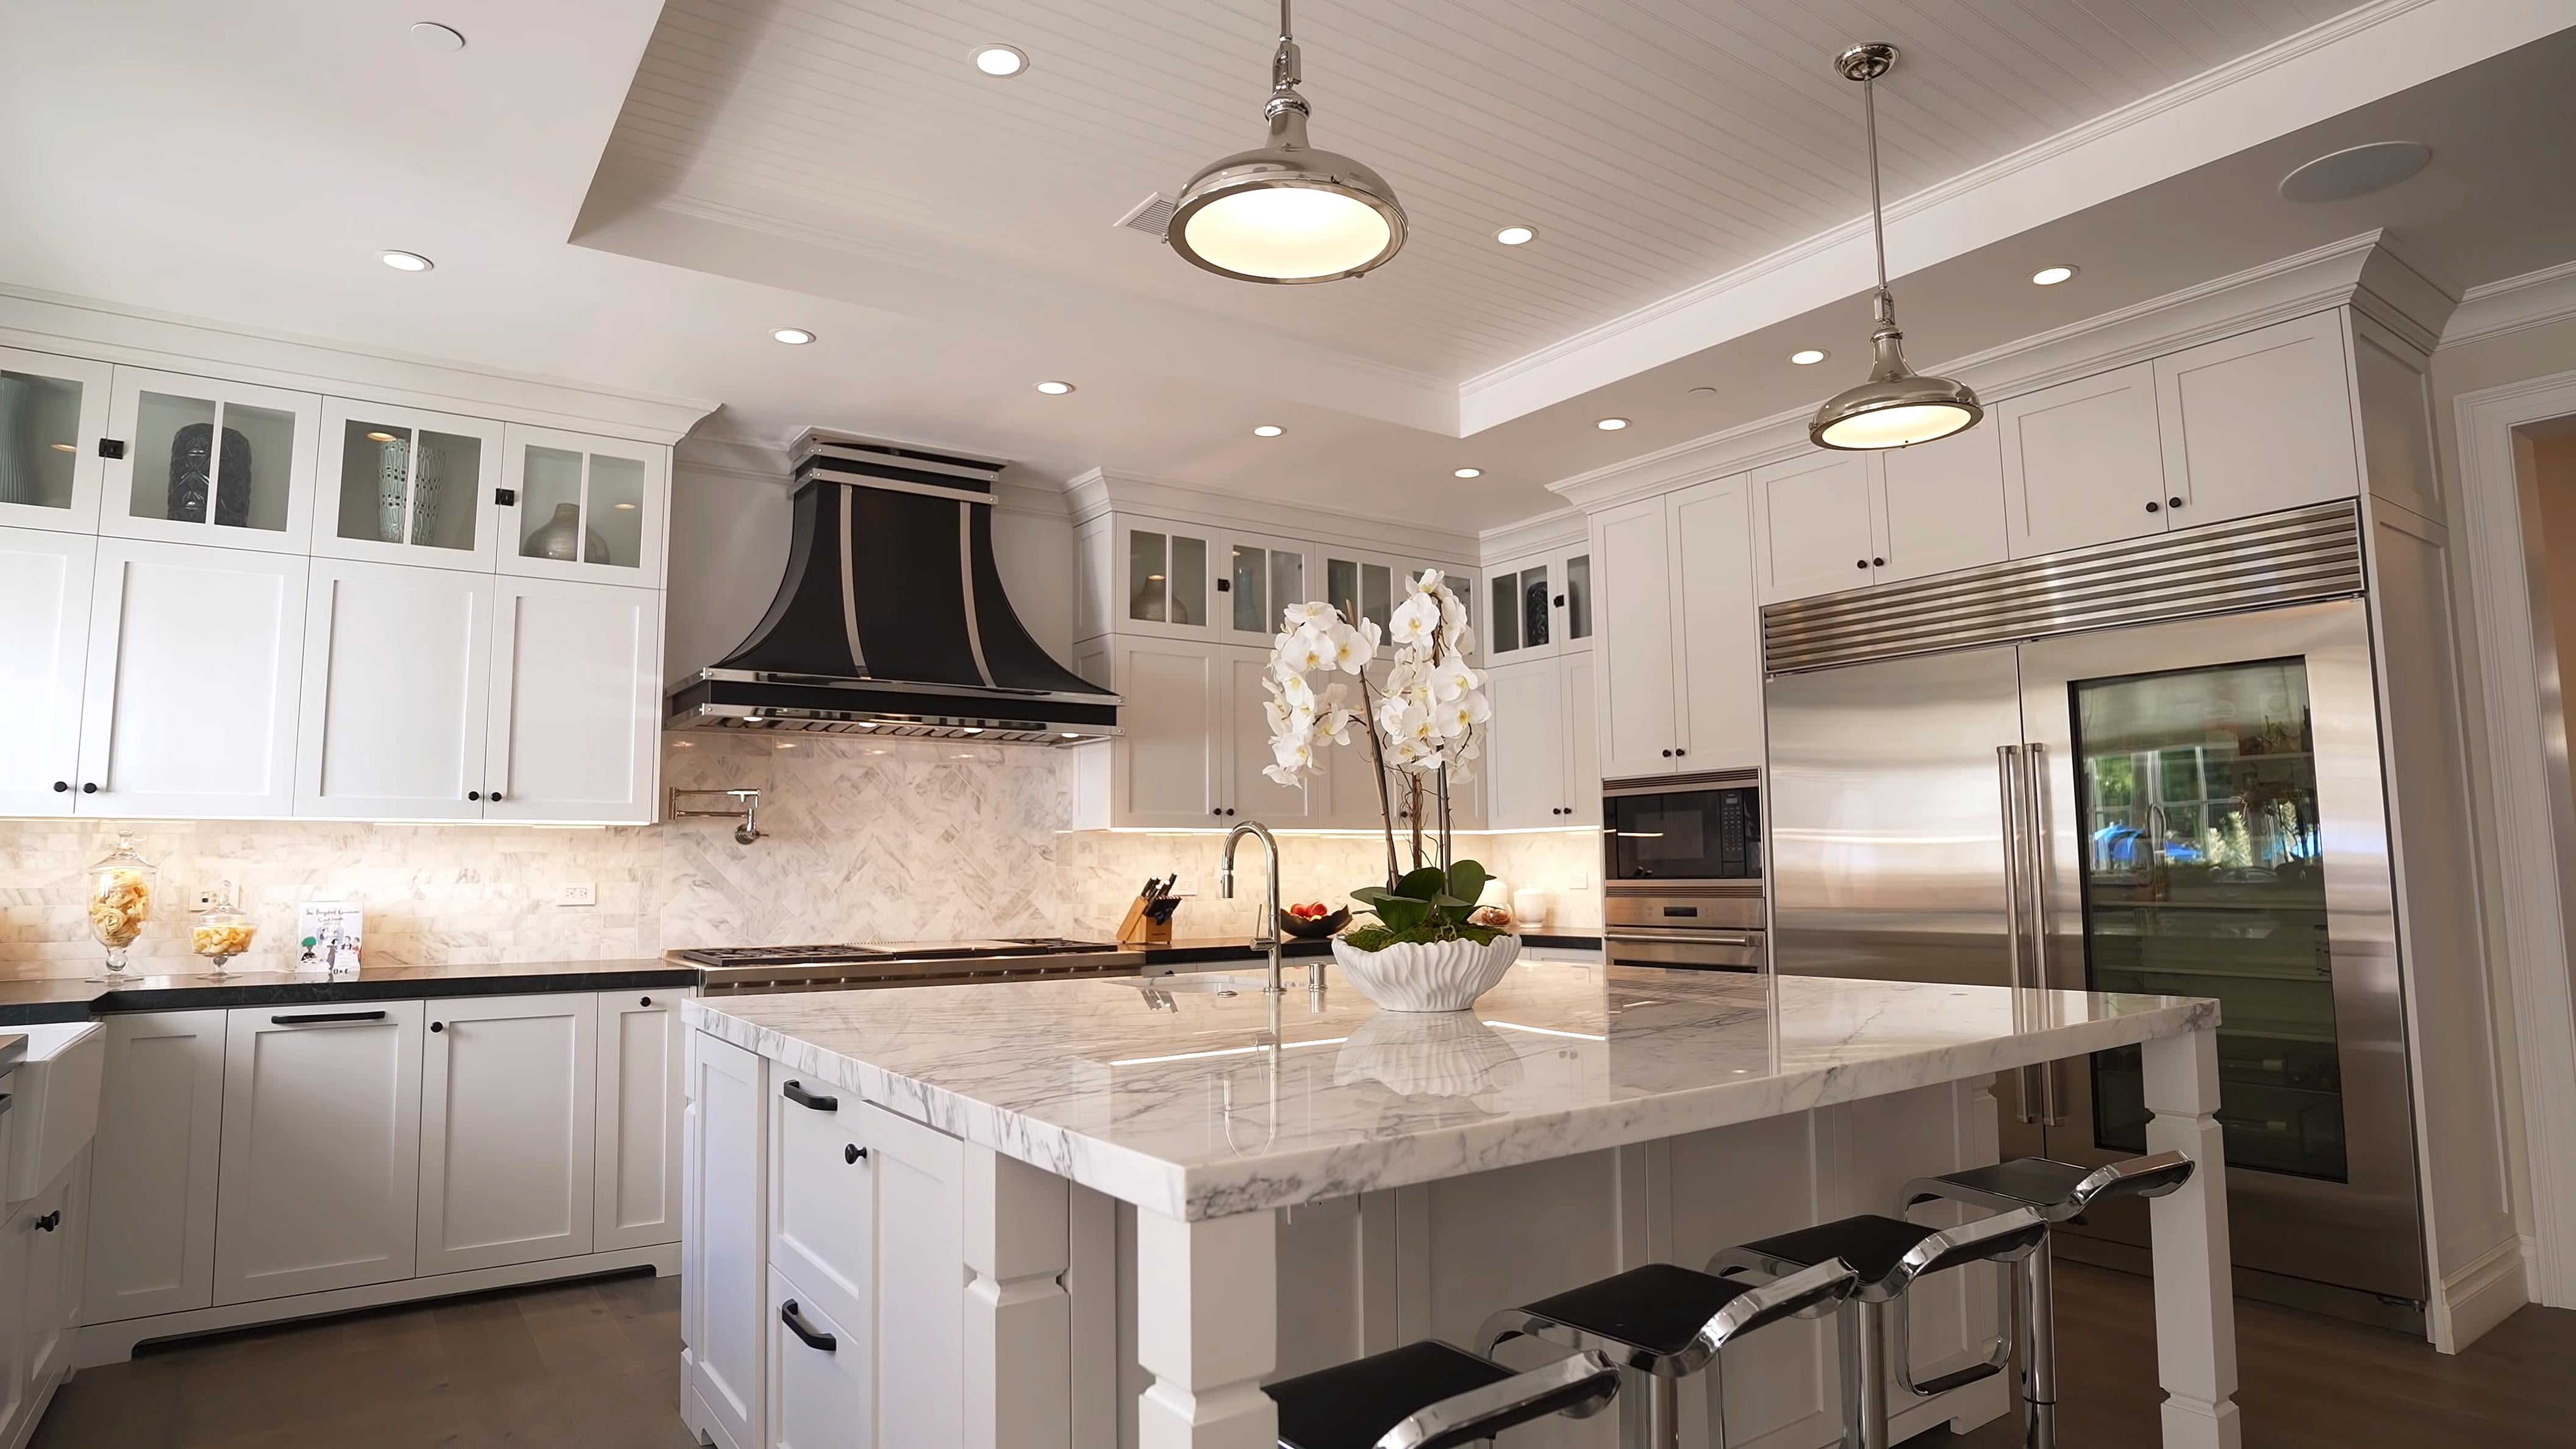 Why Should You Replace Your Kitchen Lights with LEDs?